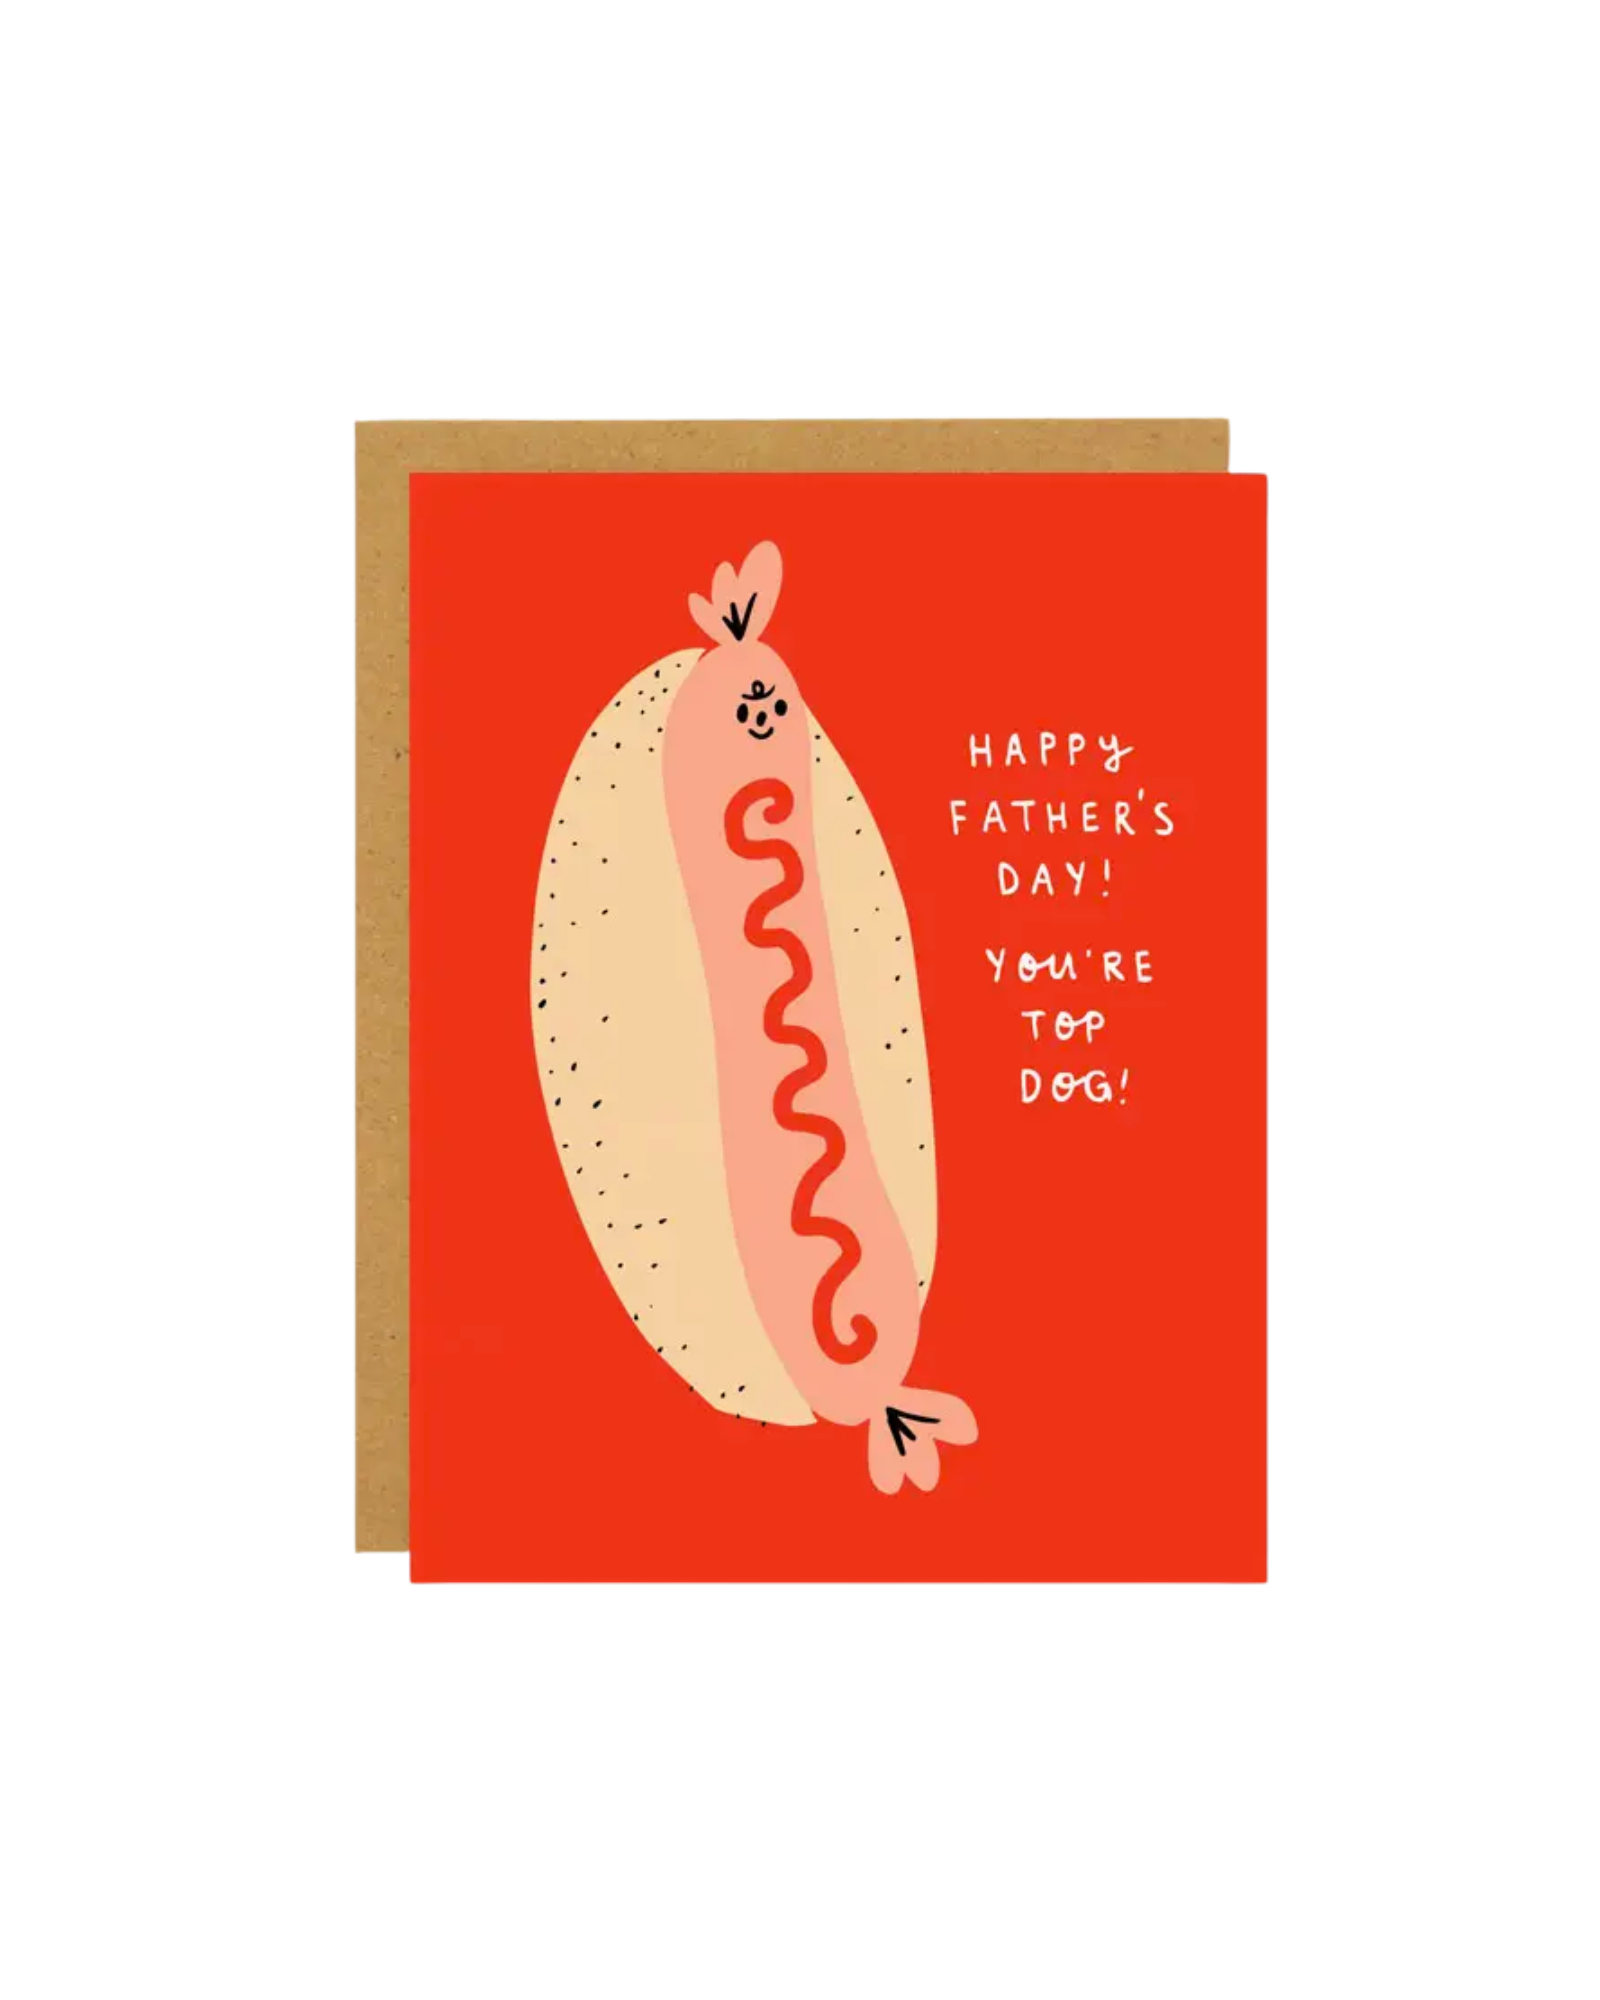 Top Dog Father's Day Greeting Card